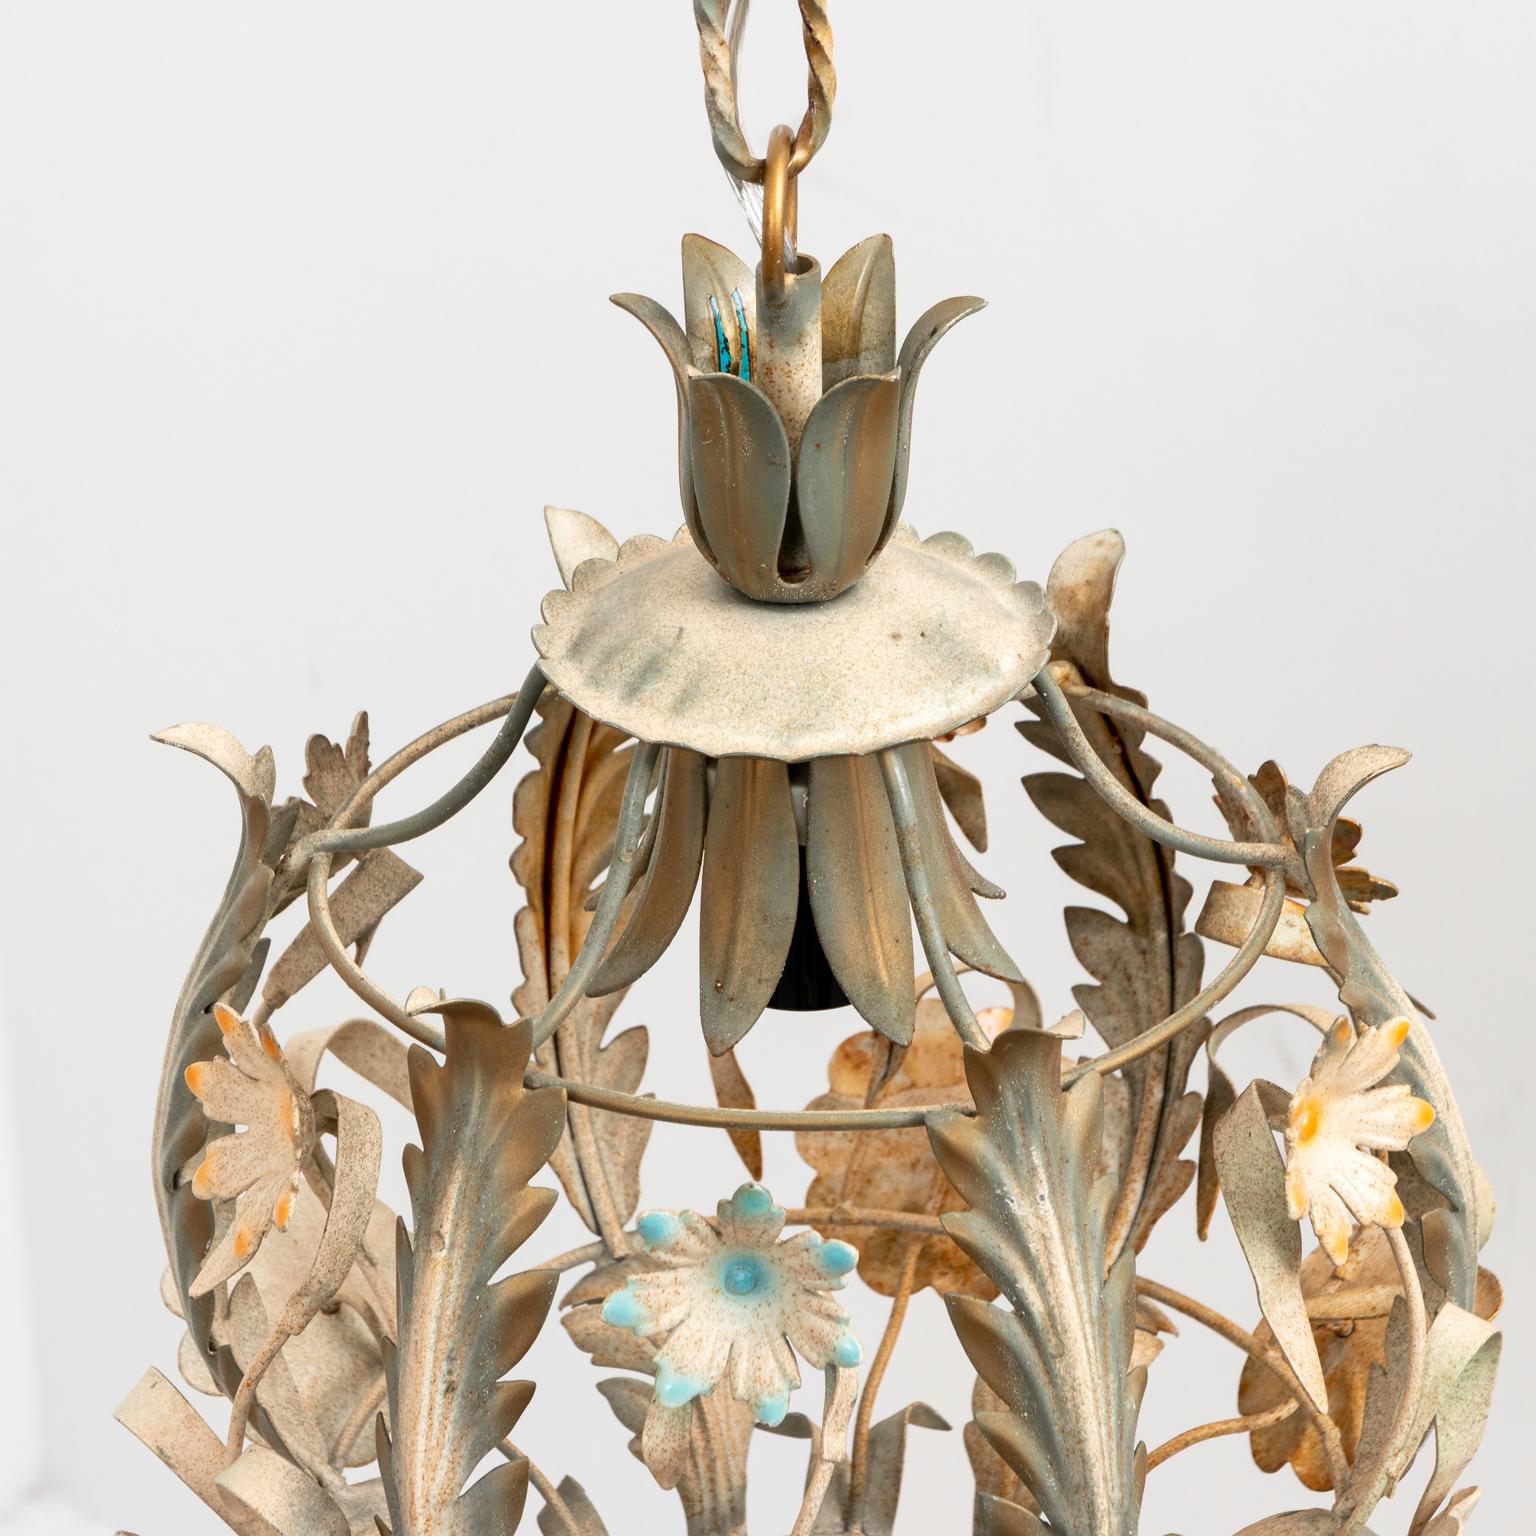 Circa 1970s petite painted Tole floral chandelier in the Hollywood Regency style with single bulb. The chandelier measures 12.00 inches long without the attached chain, original ceiling cap included. Please note of wear consistent with age. New